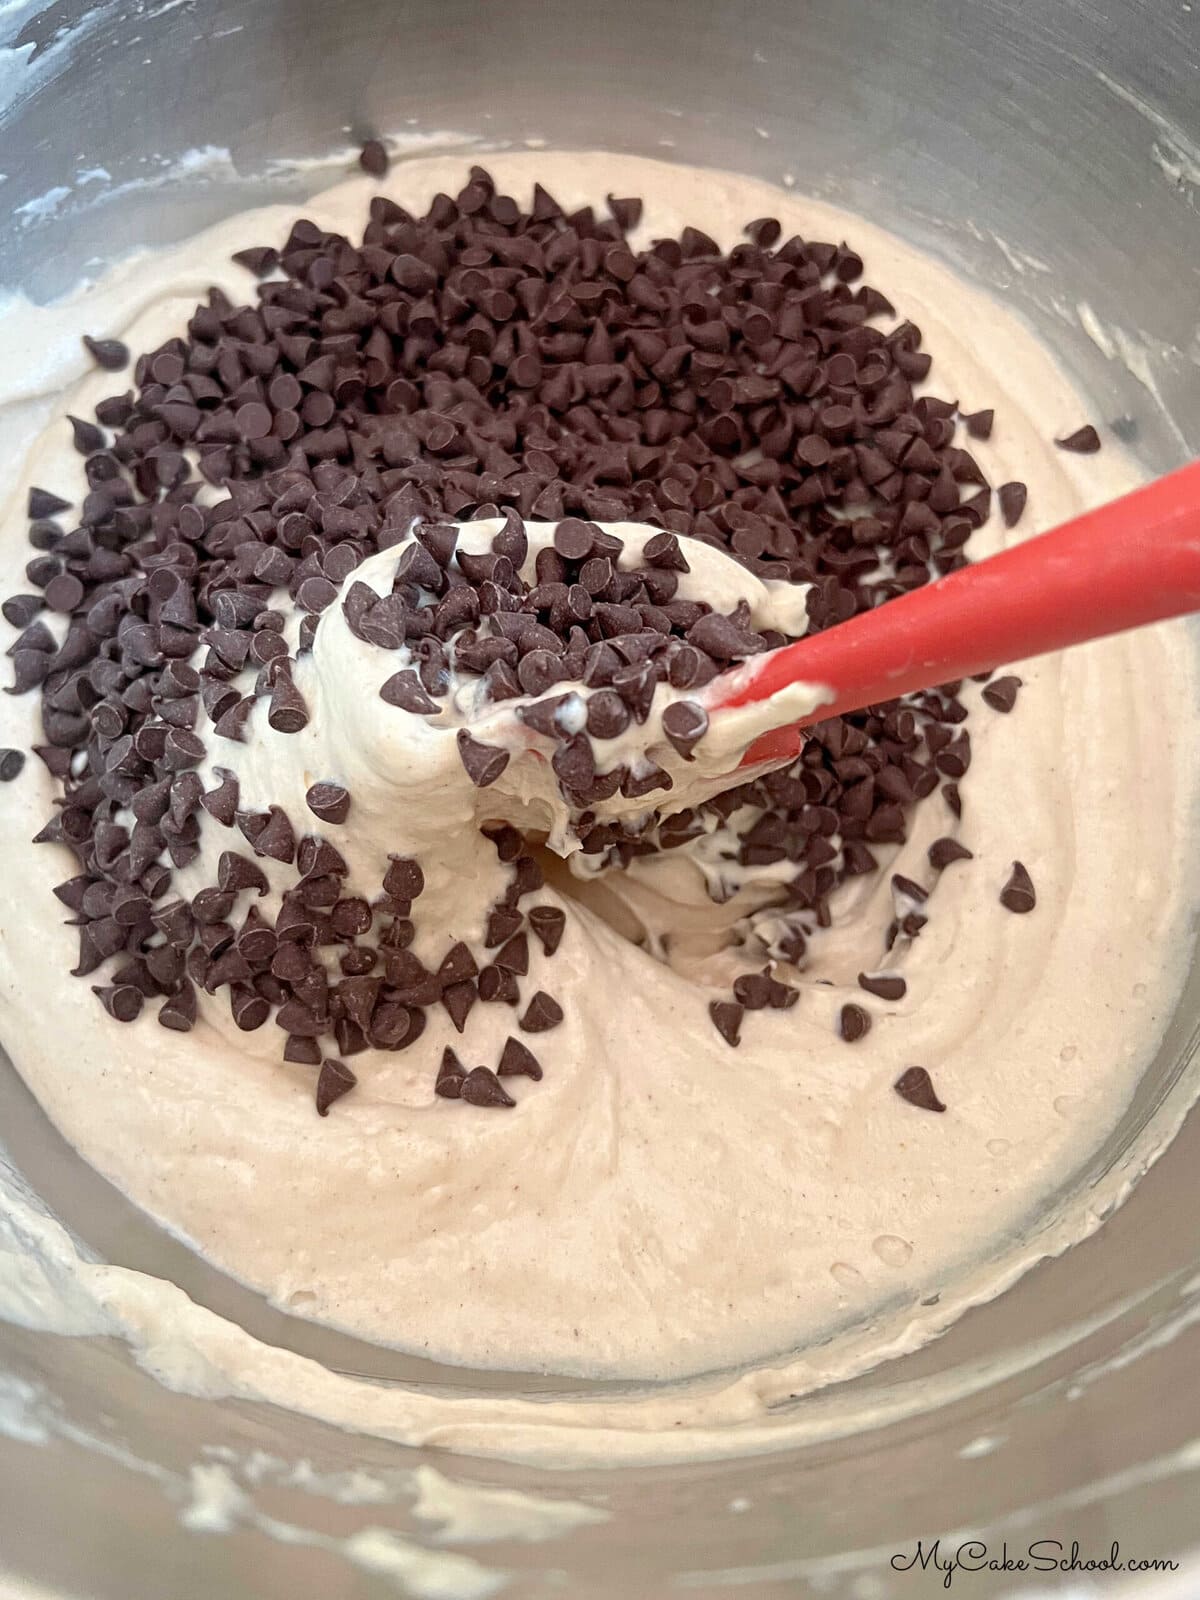 Folding mini chocolate chips into the cupcake batter.